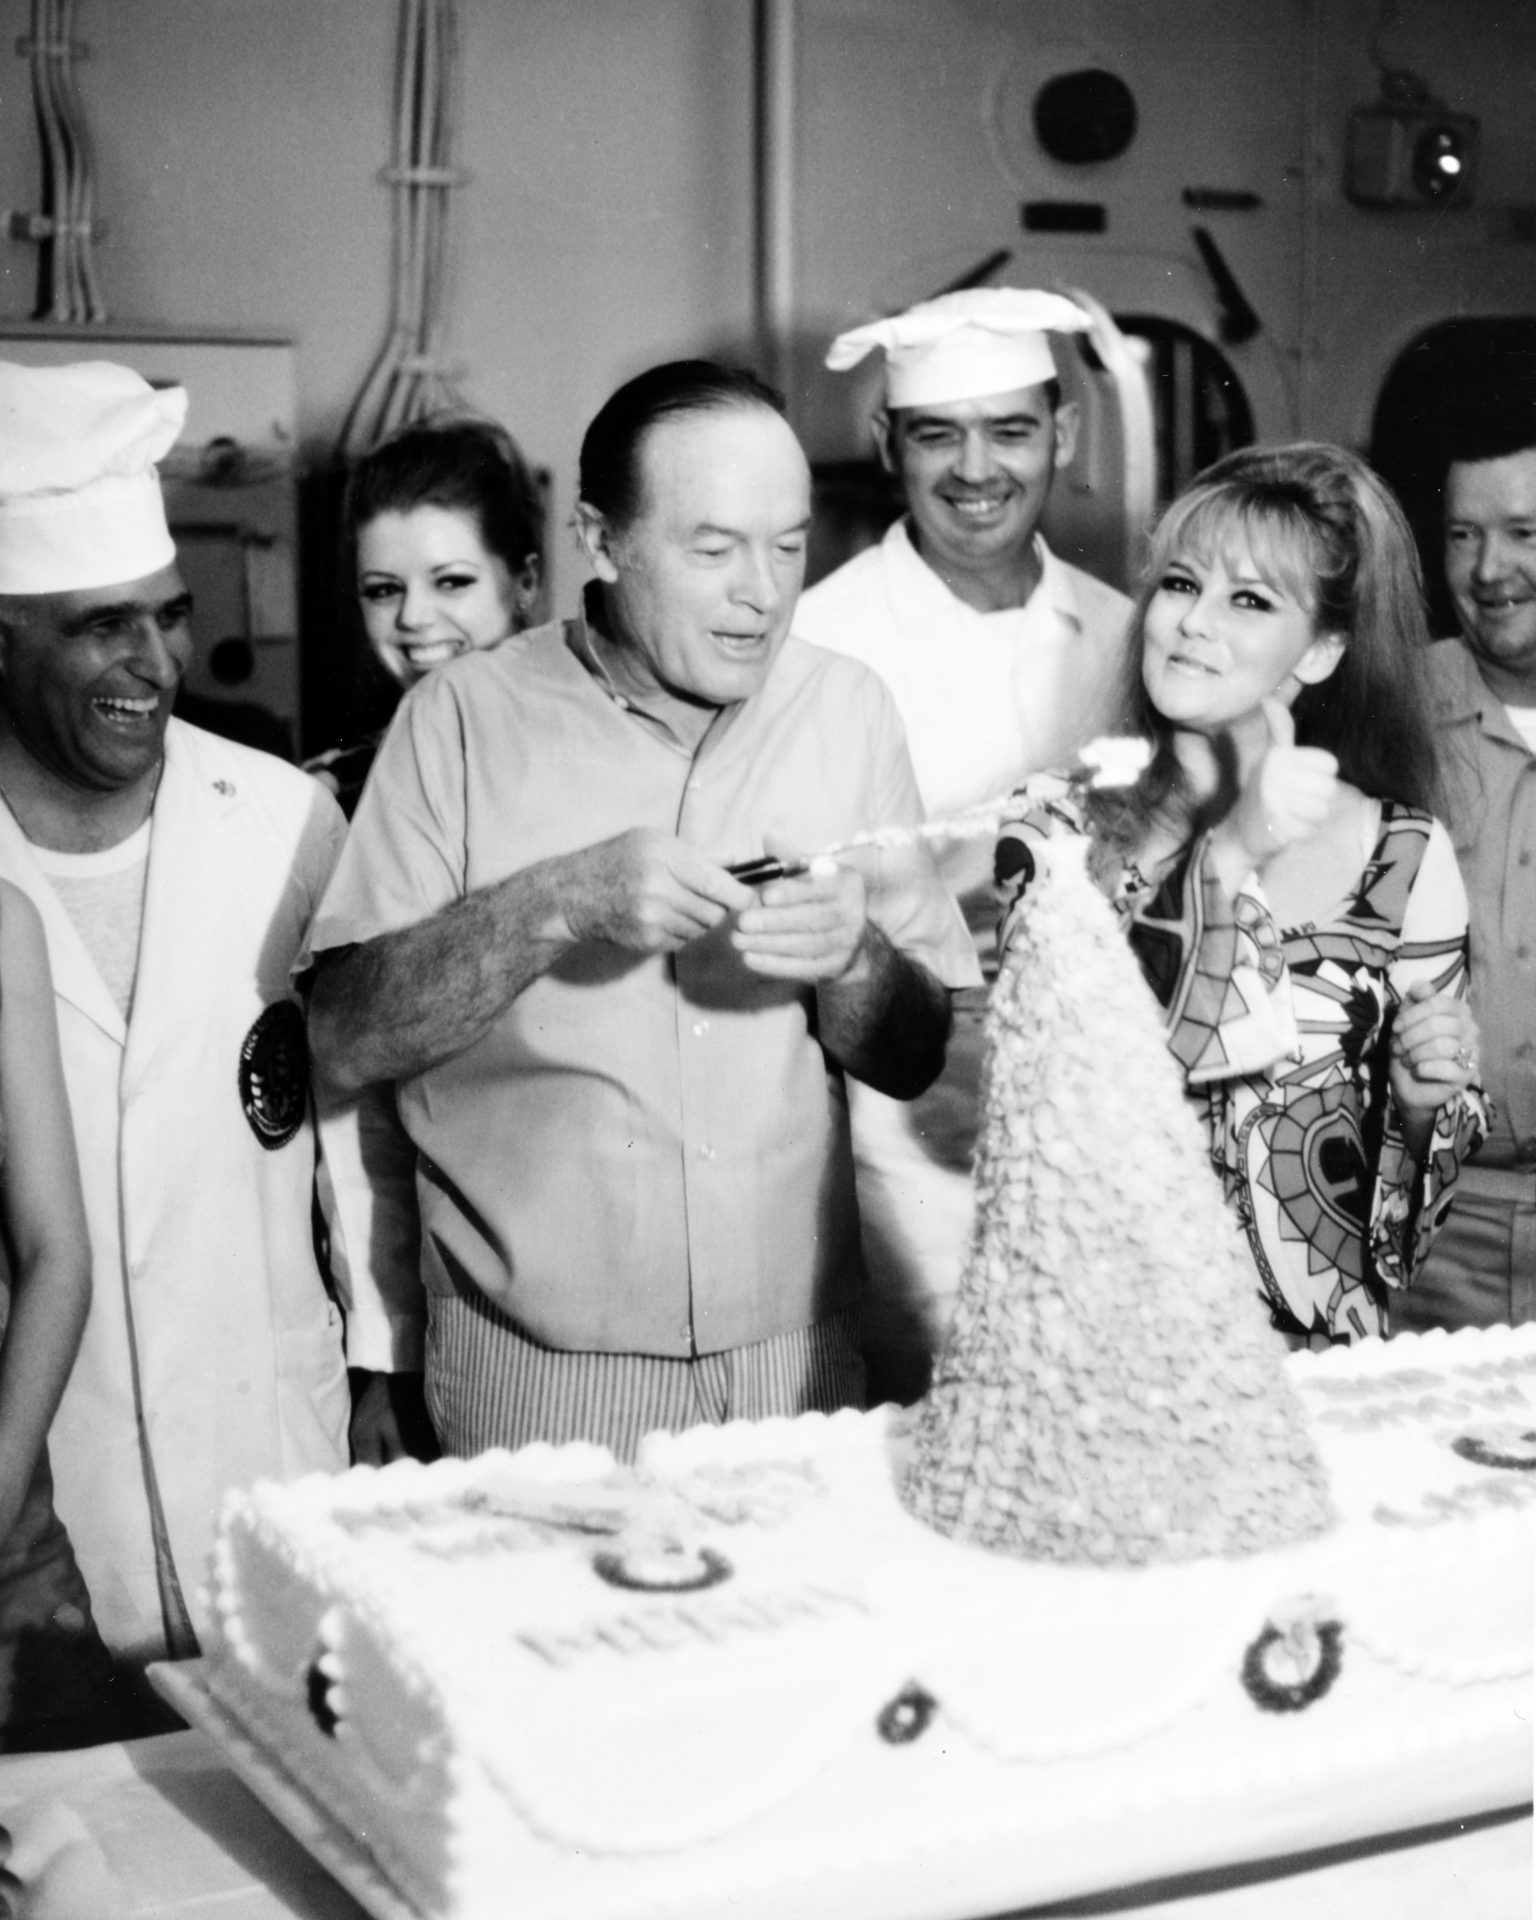 Actor and comedian Bob Hope and actress Ann-Margret, on board the USS New Jersey for the Bob Hope Christmas USO Show on Christmas Day in 1968. Ann-Margret was honored at the Washington event for her service to the USO.